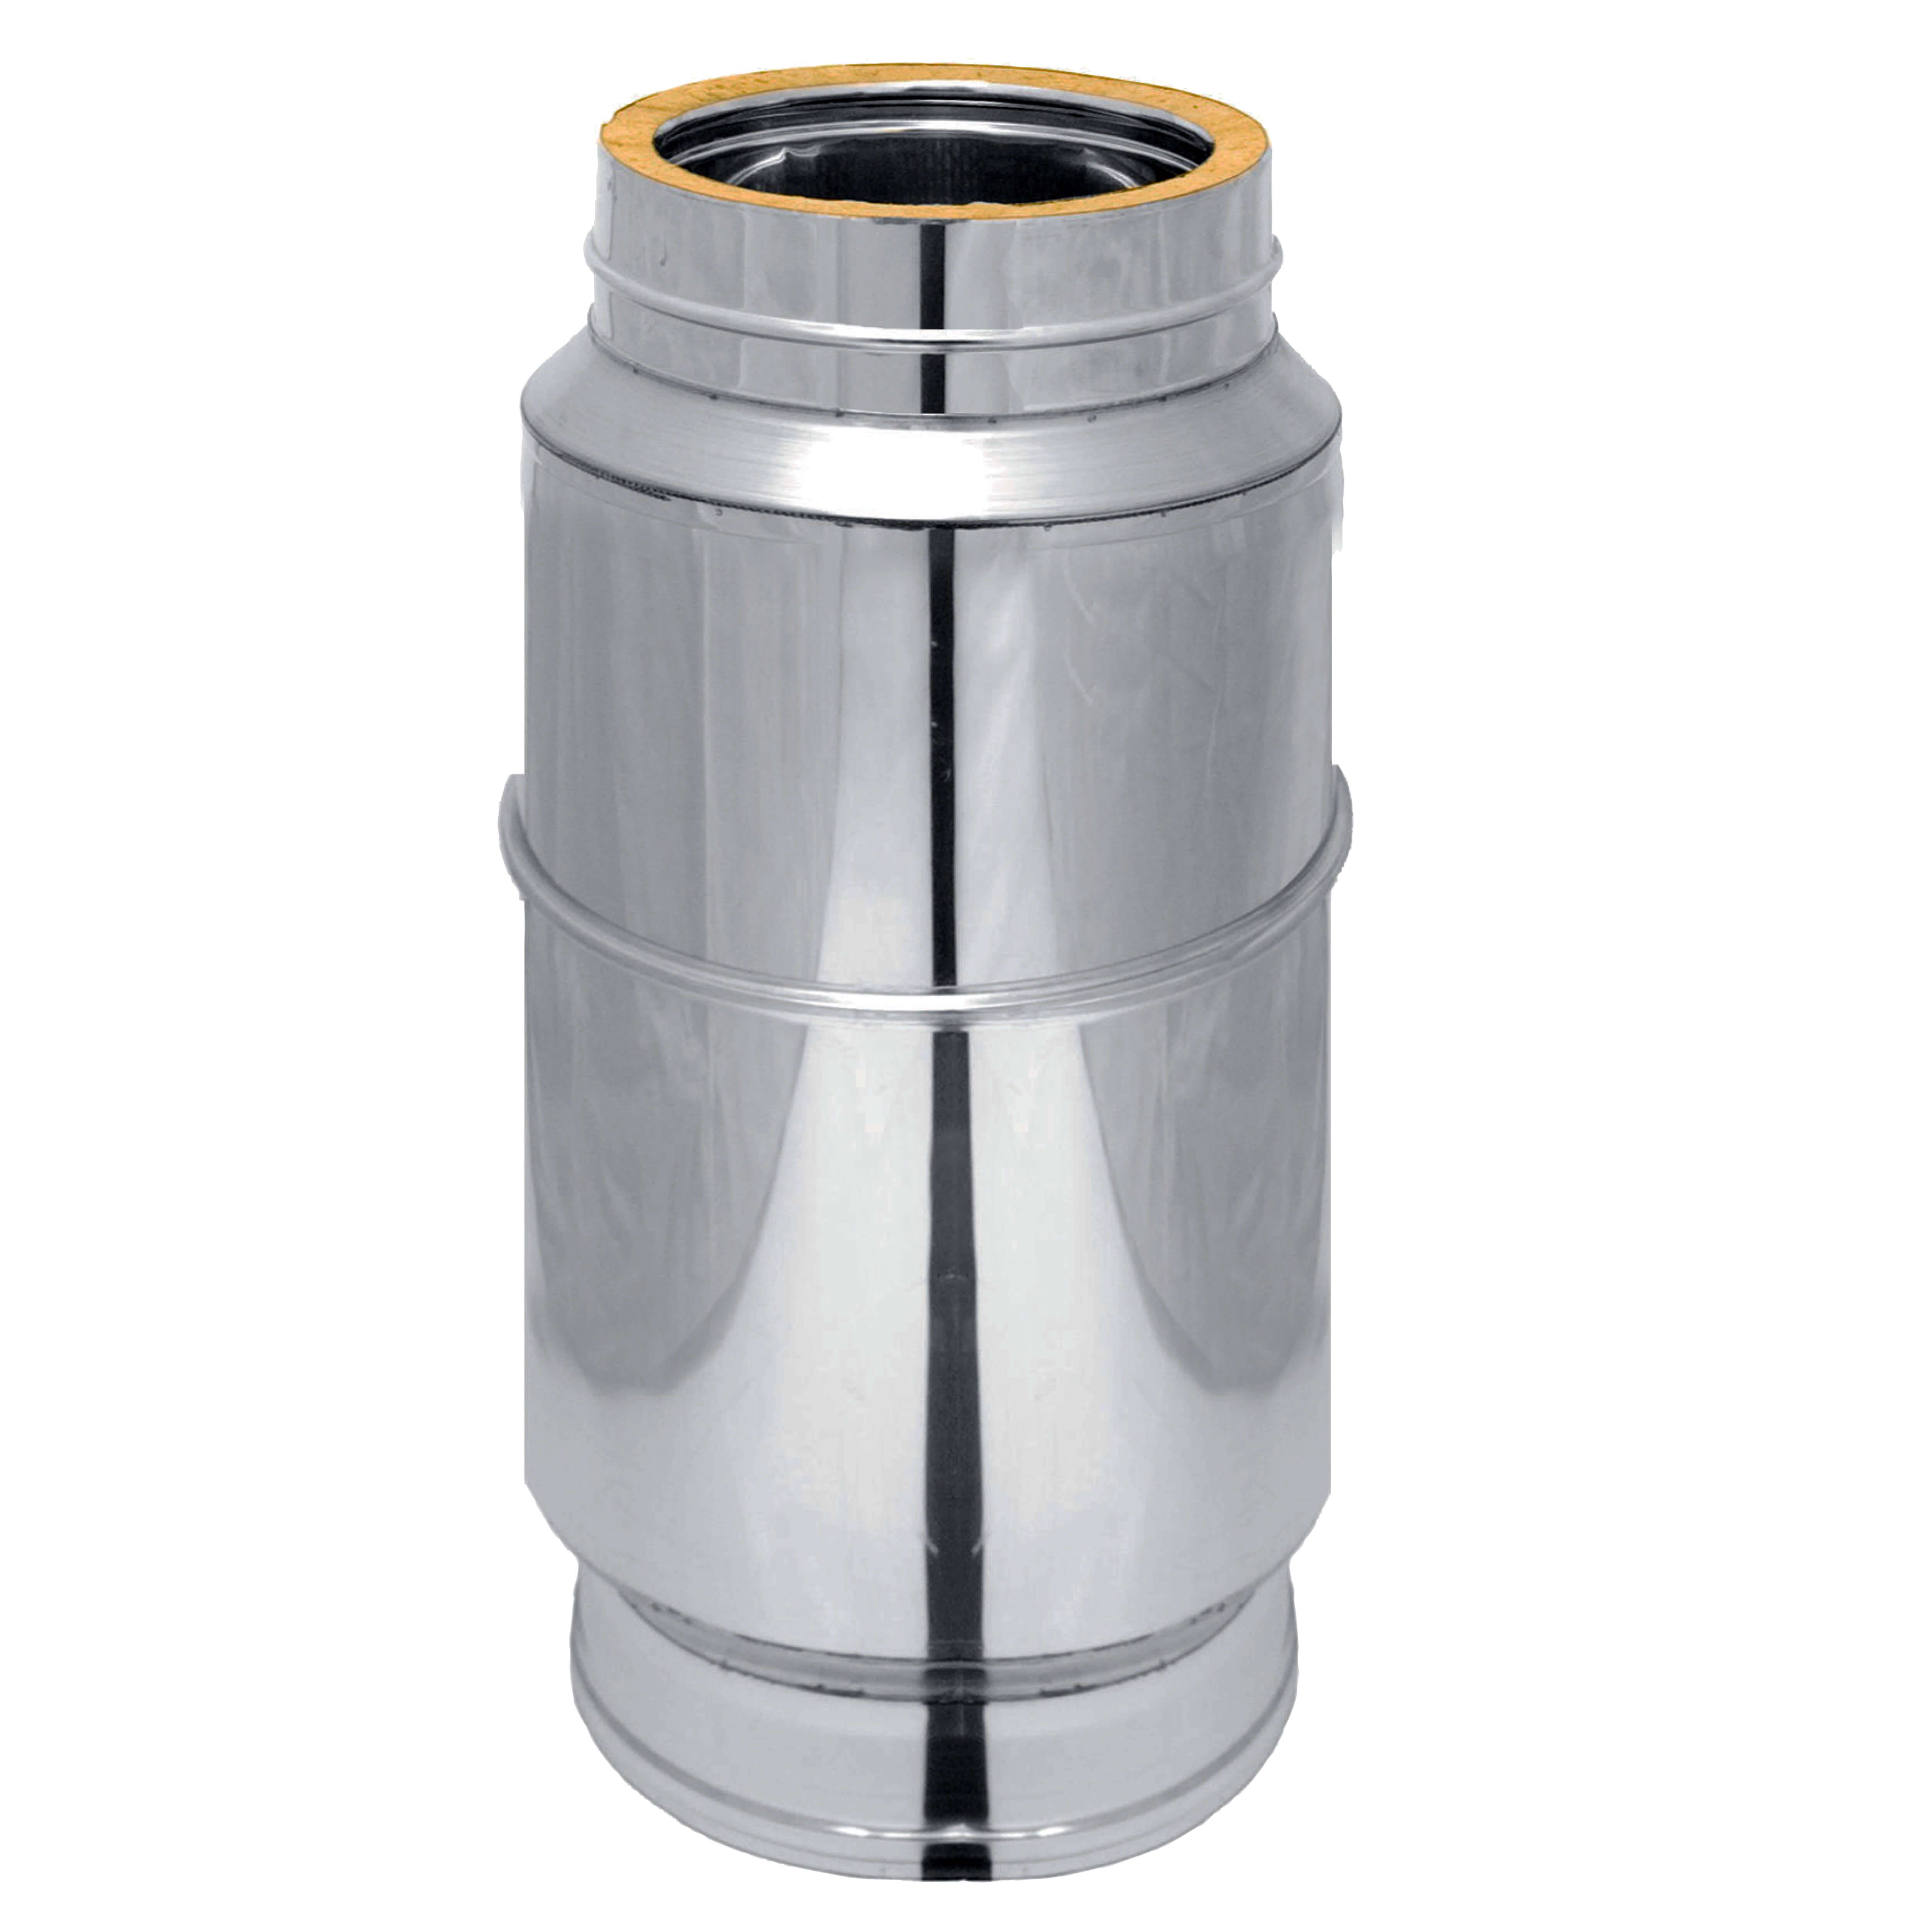 Absorption silencers, absorbing materials disposed within a hollow cylinder.